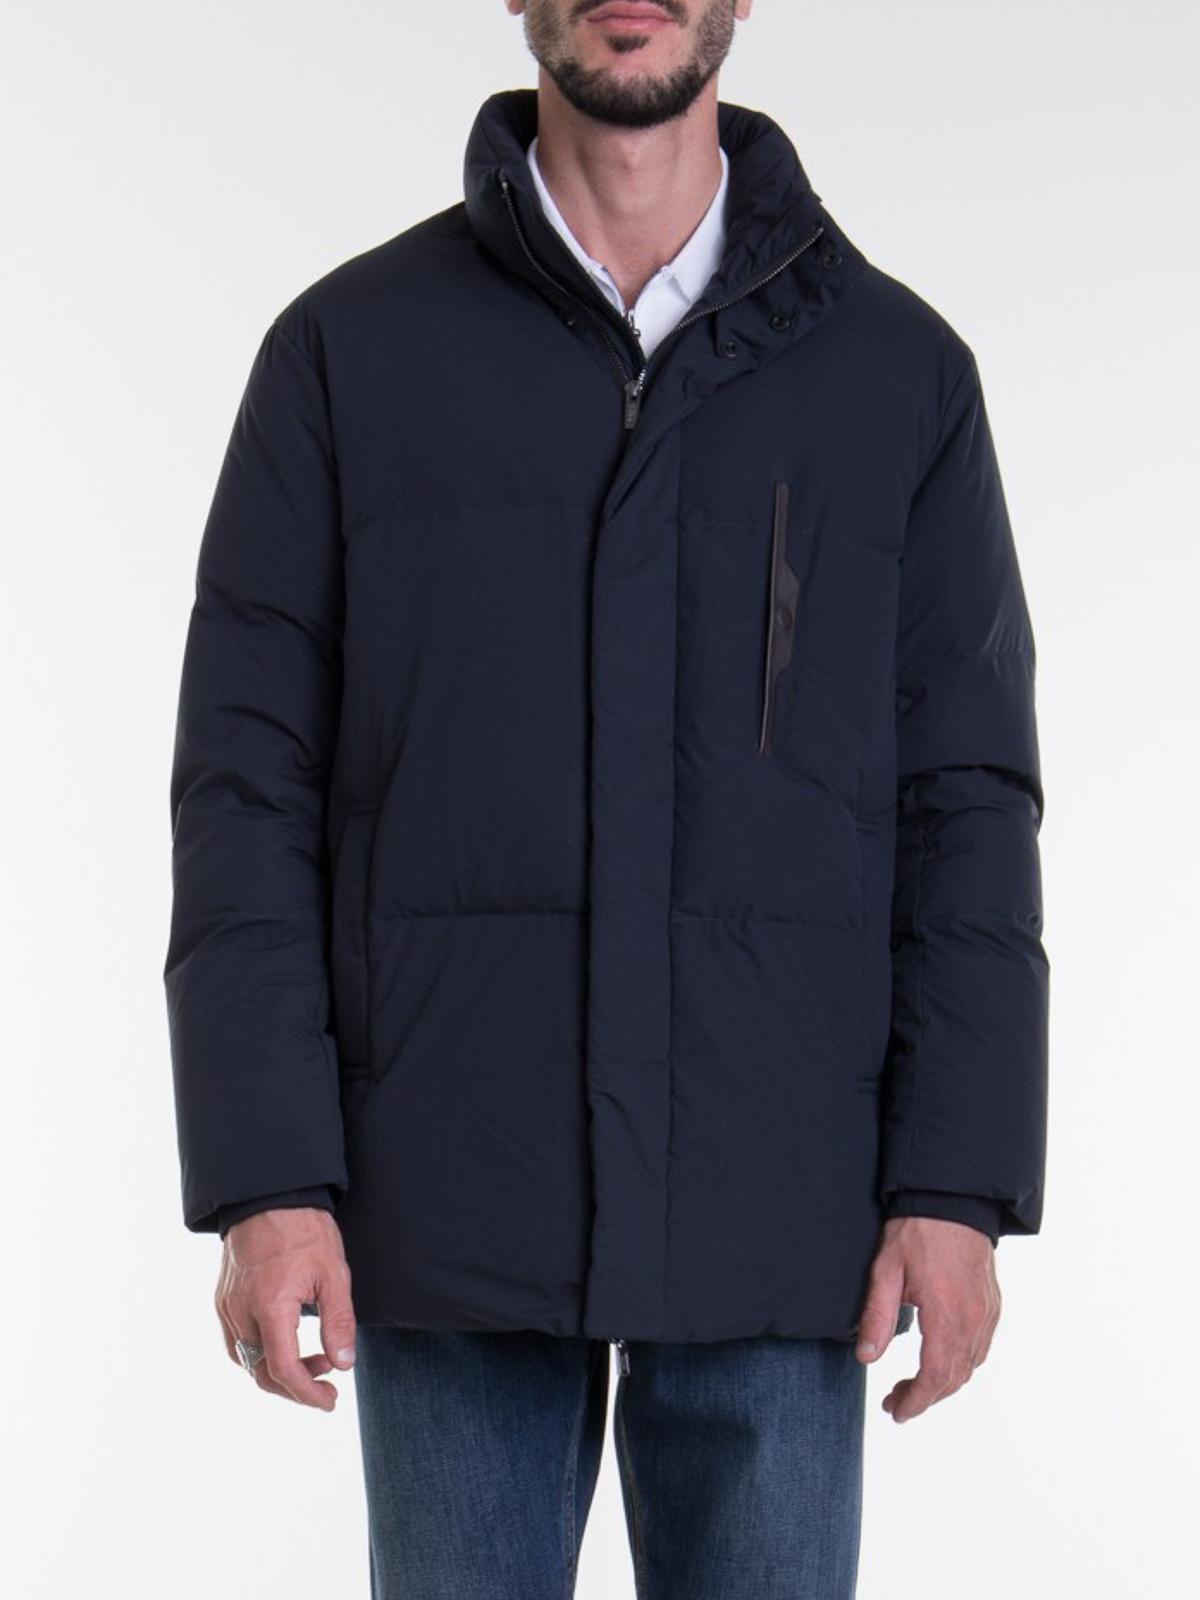 Emporio Armani Leather Insert Puffer Jacket in Blue for Men - Lyst